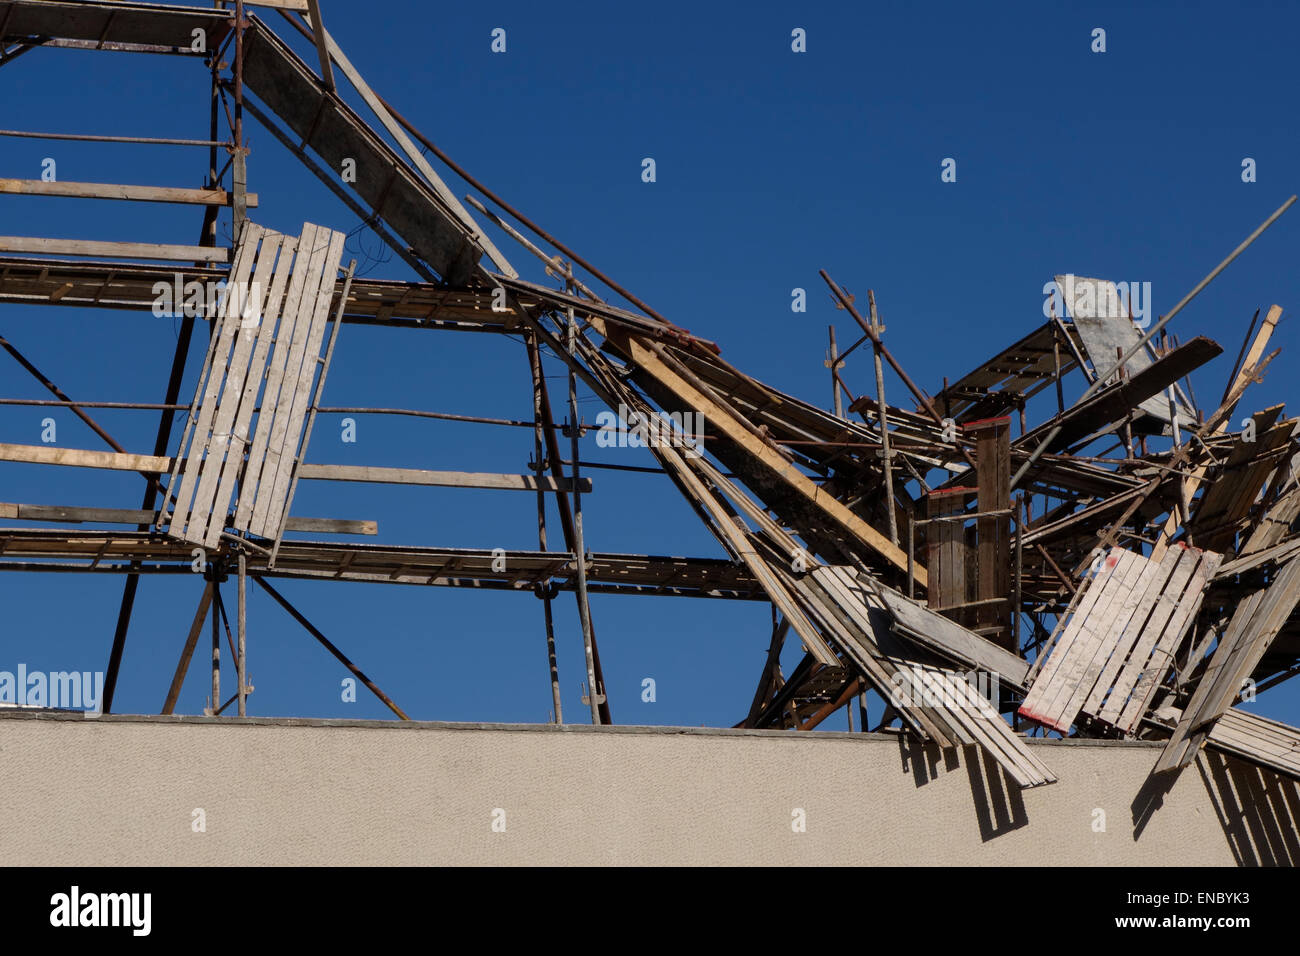 An art installation depicting a collapsed scaffolding entitled “stalagmite” by Israeli artist Shai Ratner placed over Helena Rubinstein Pavilion for Contemporary Art in Tel Aviv Israel Stock Photo